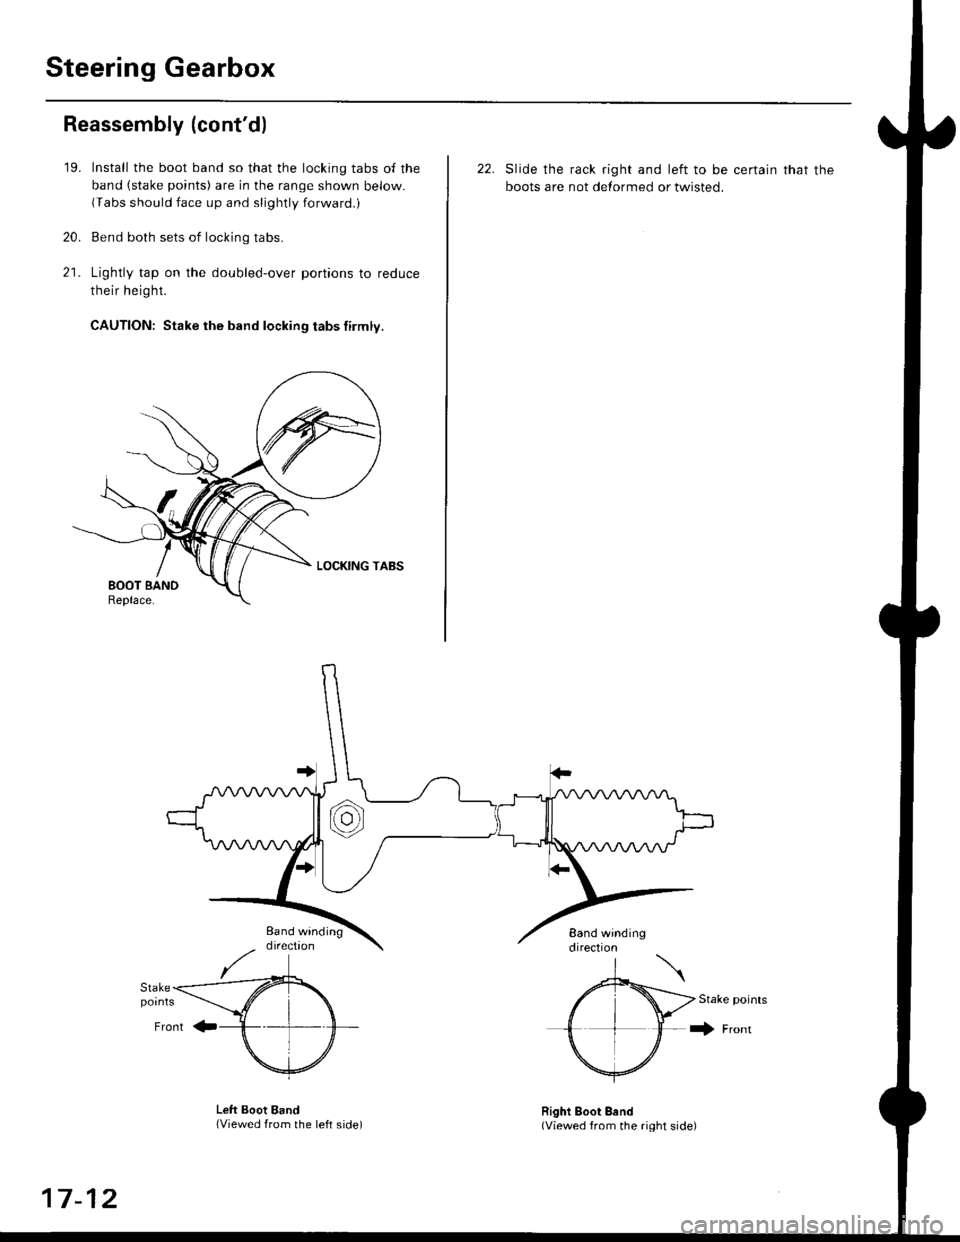 HONDA CIVIC 1998 6.G User Guide Steering Gearbox
Reassembly (contd)
21.
19.
20.
Install the boot band so that the locking tabs of the
band (stake points) are in the range shown below.
{Tabs should face up and slightly forwaro.,
Be